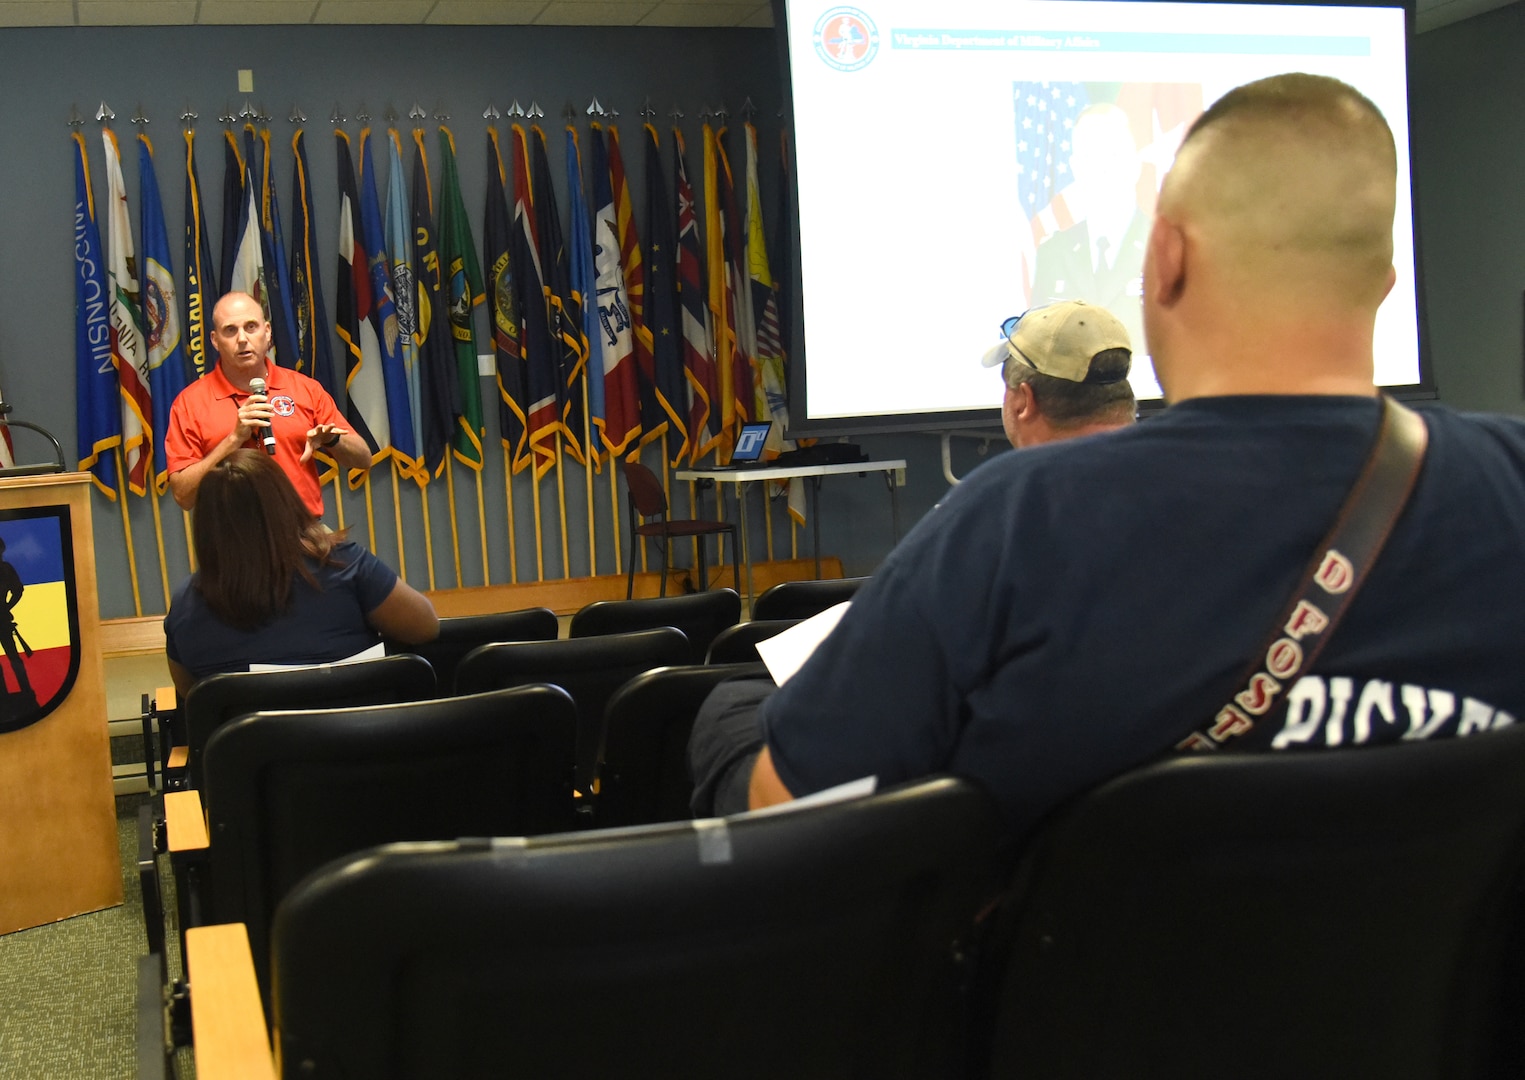 Orientation course prepares new DMA workers for success